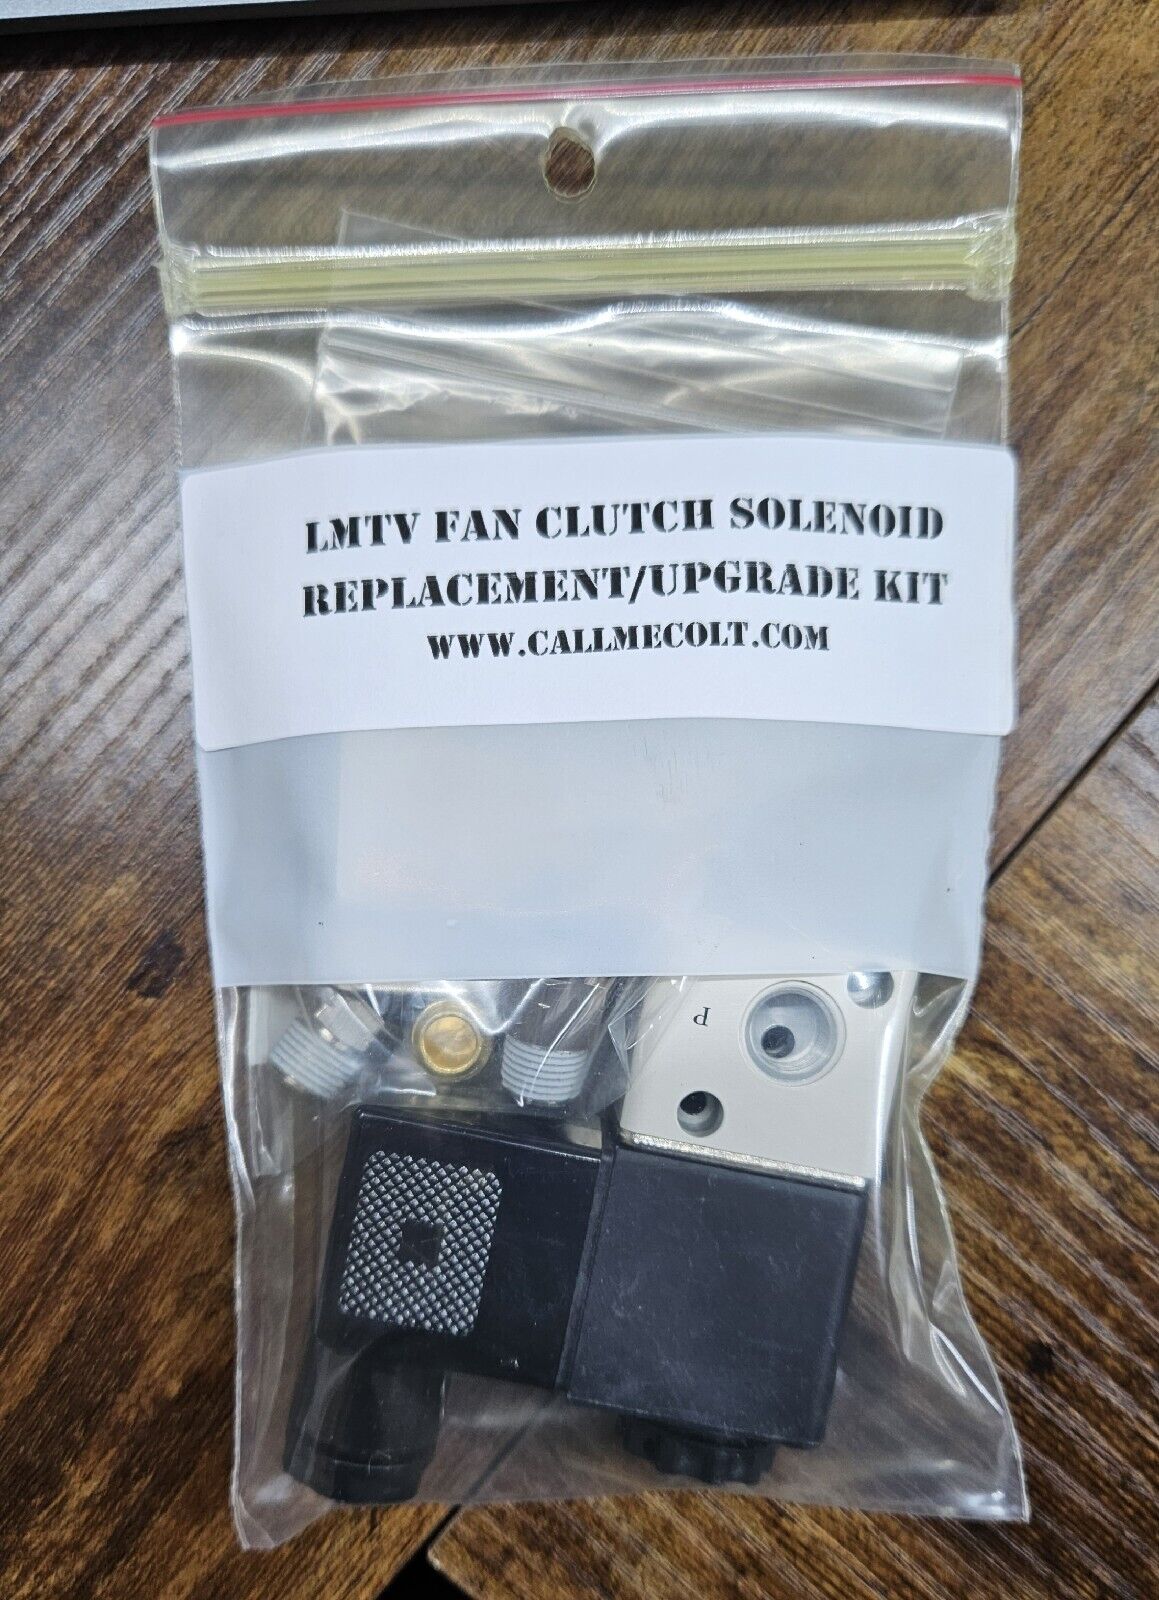 LMTV Fan Clutch Solenoid Replacement Kit